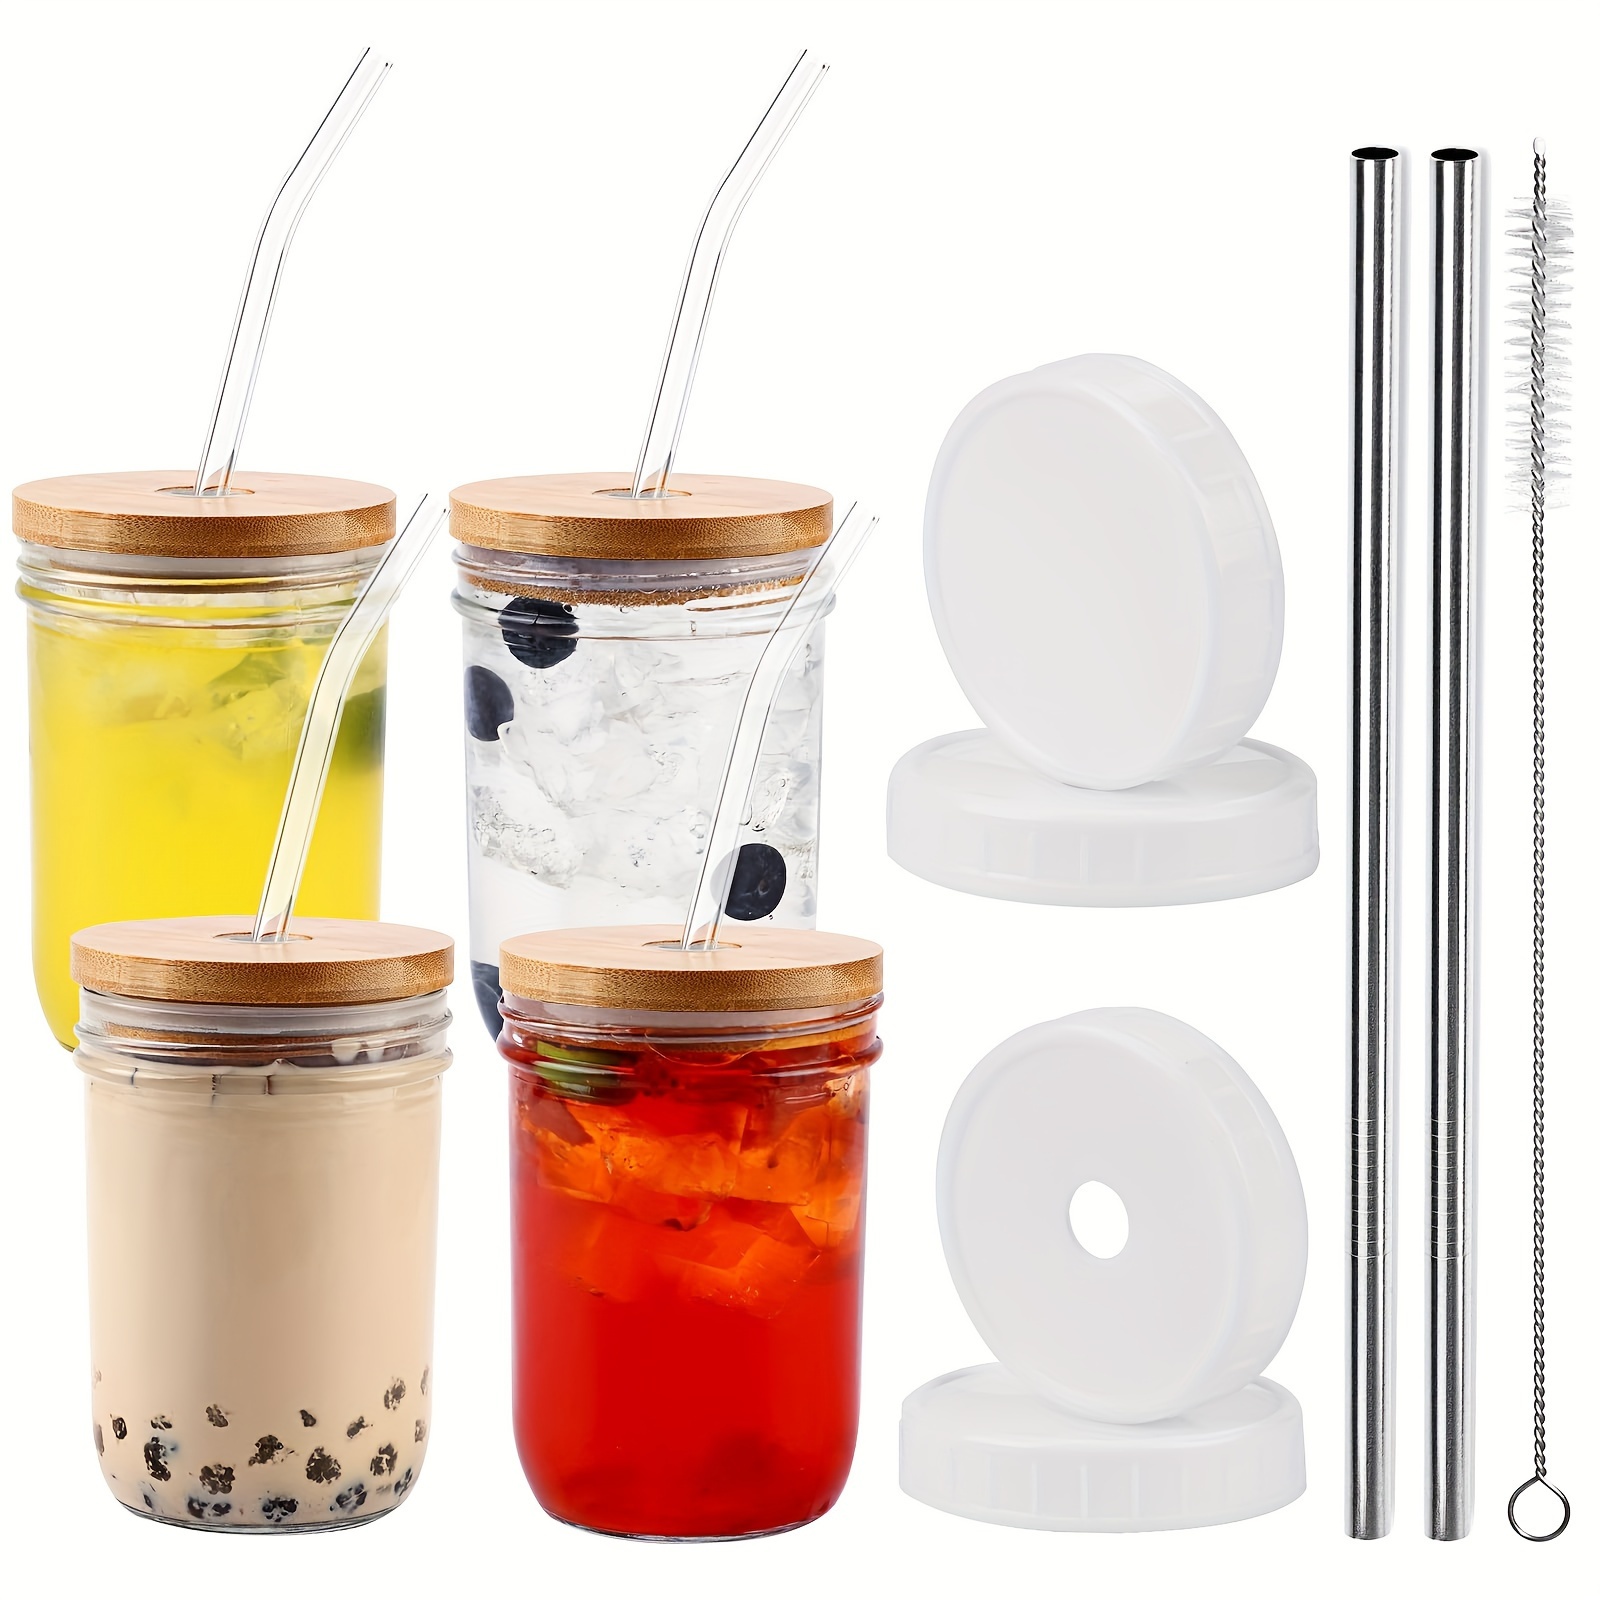 6 Pack 470ml Glass Jar with Bamboo Lids and Straws Drinking Glass